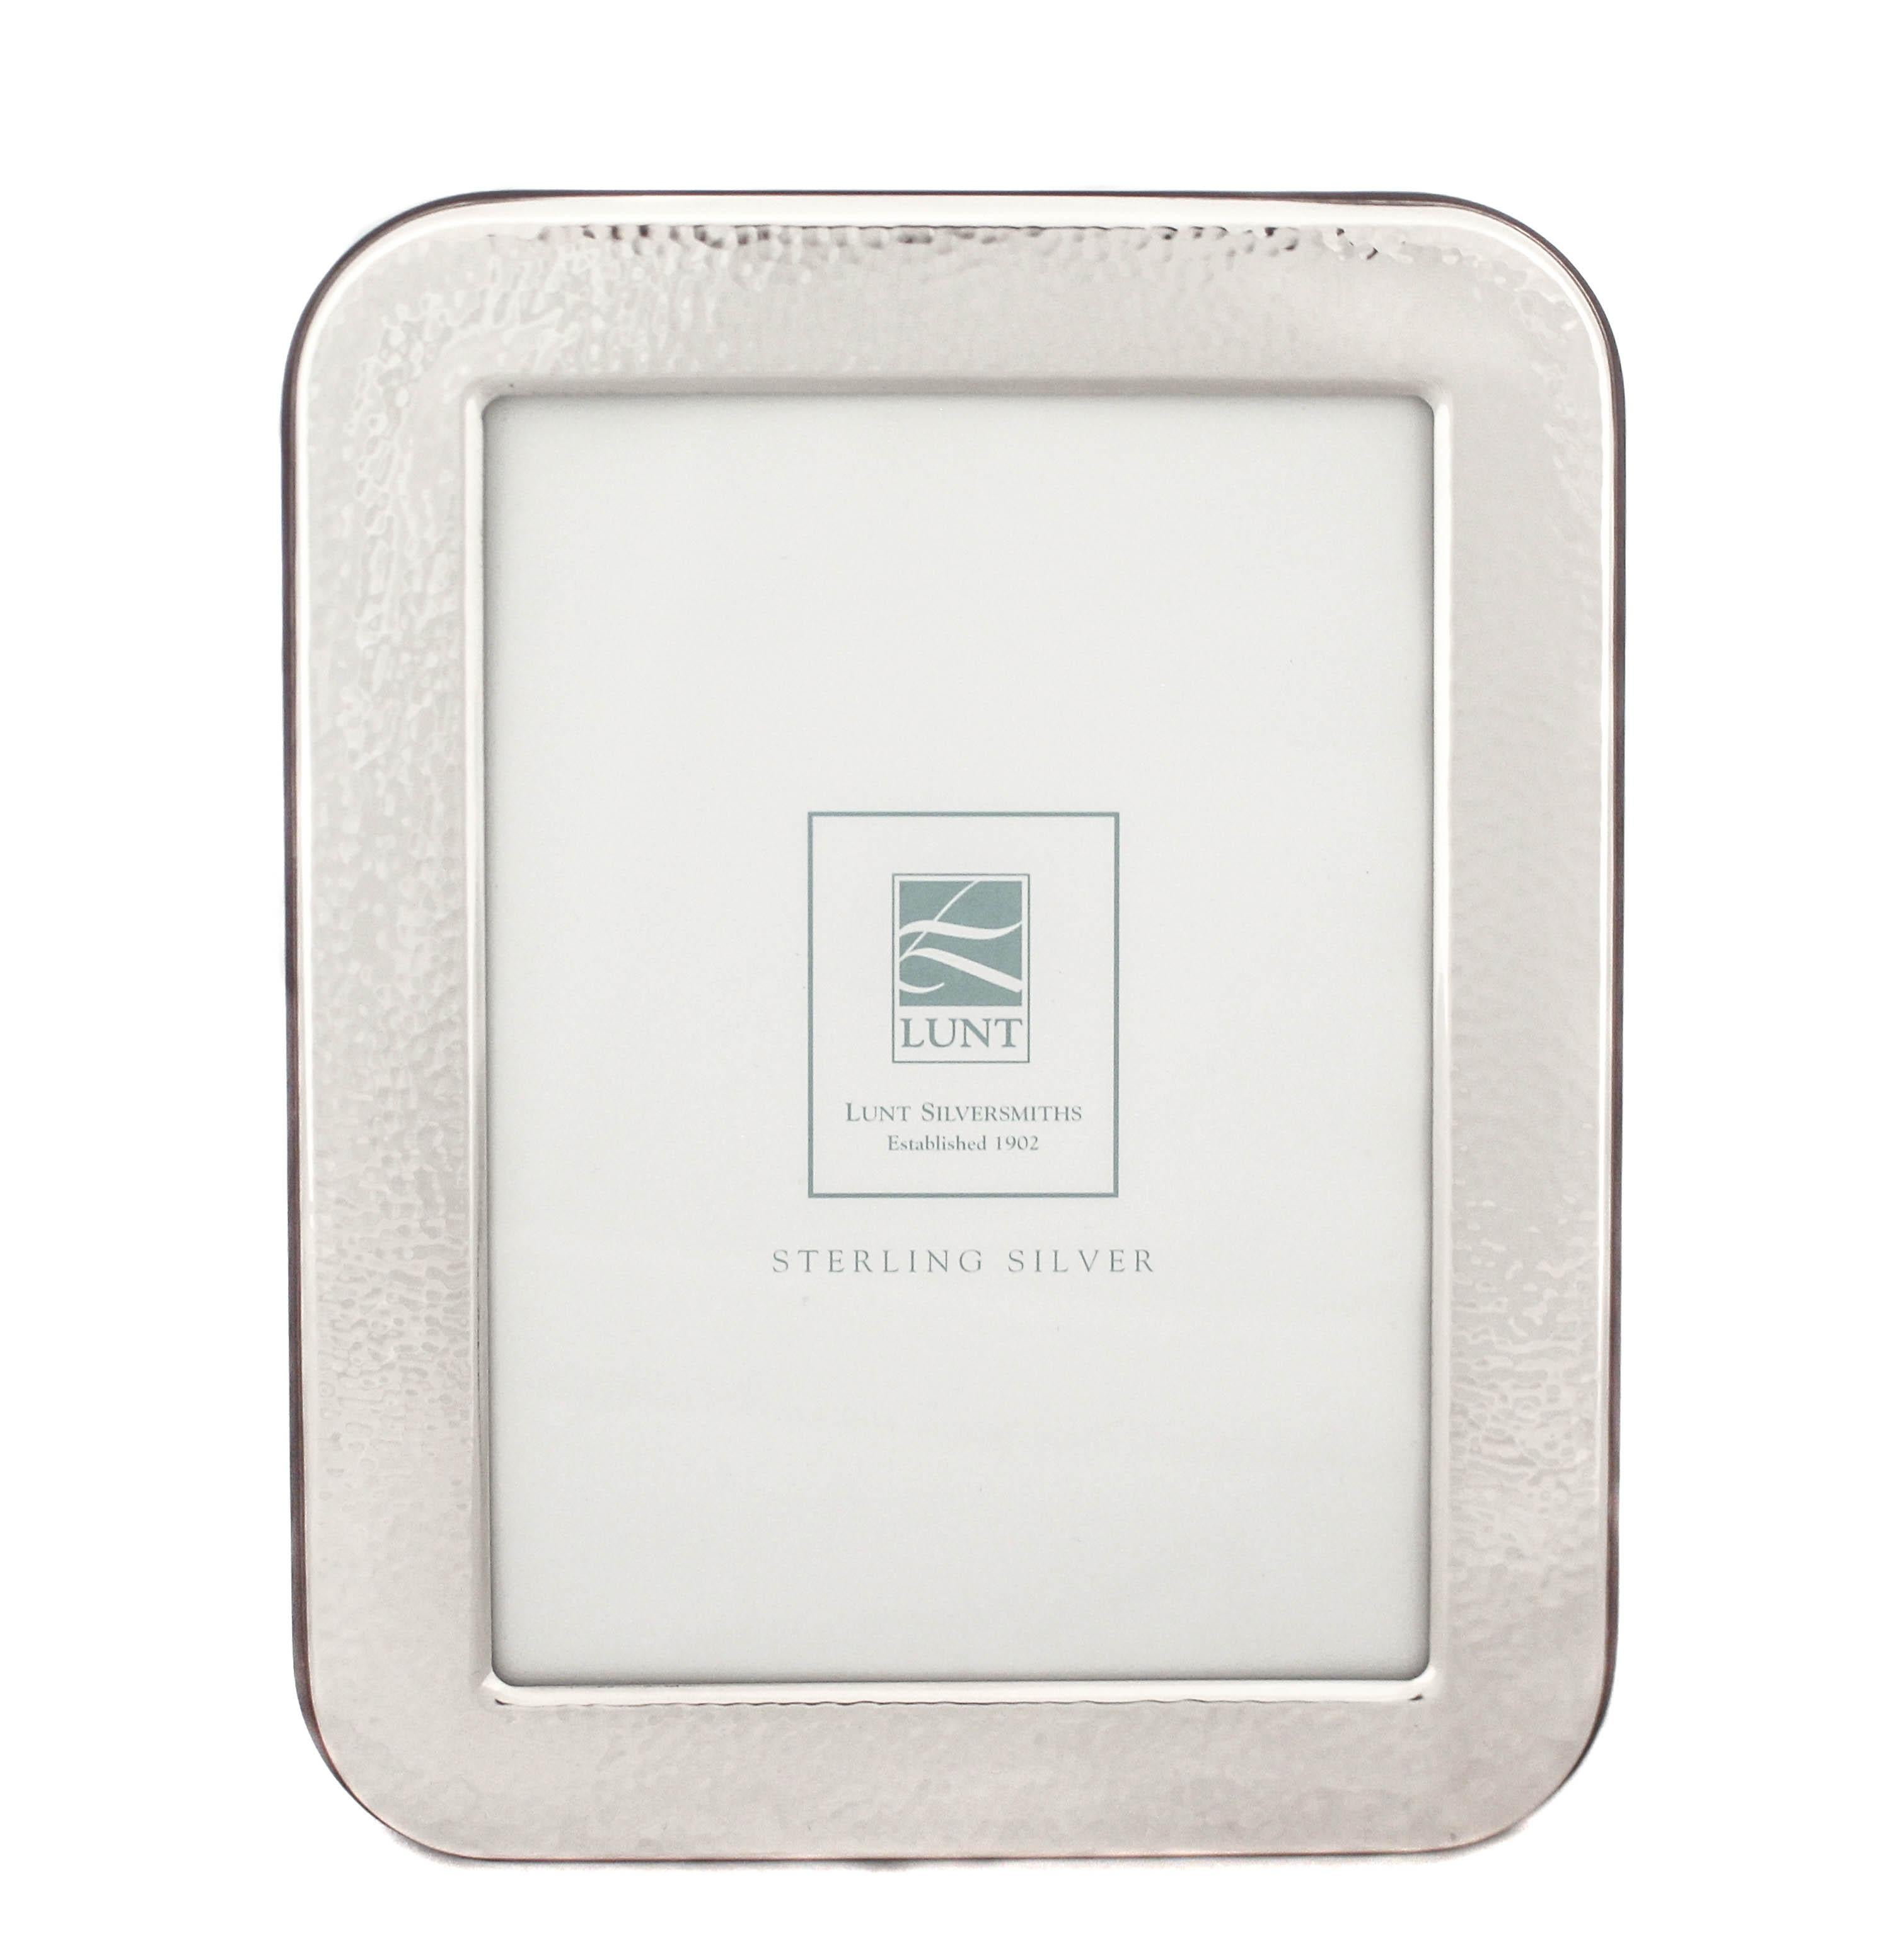 This sterling silver picture frame made by Lunt Silversmiths is new and comes in the original box.  The sterling silver has been coated so it won’t tarnish and the back is lacquer wood for an elegant sleek look.  Excellent quality and design!